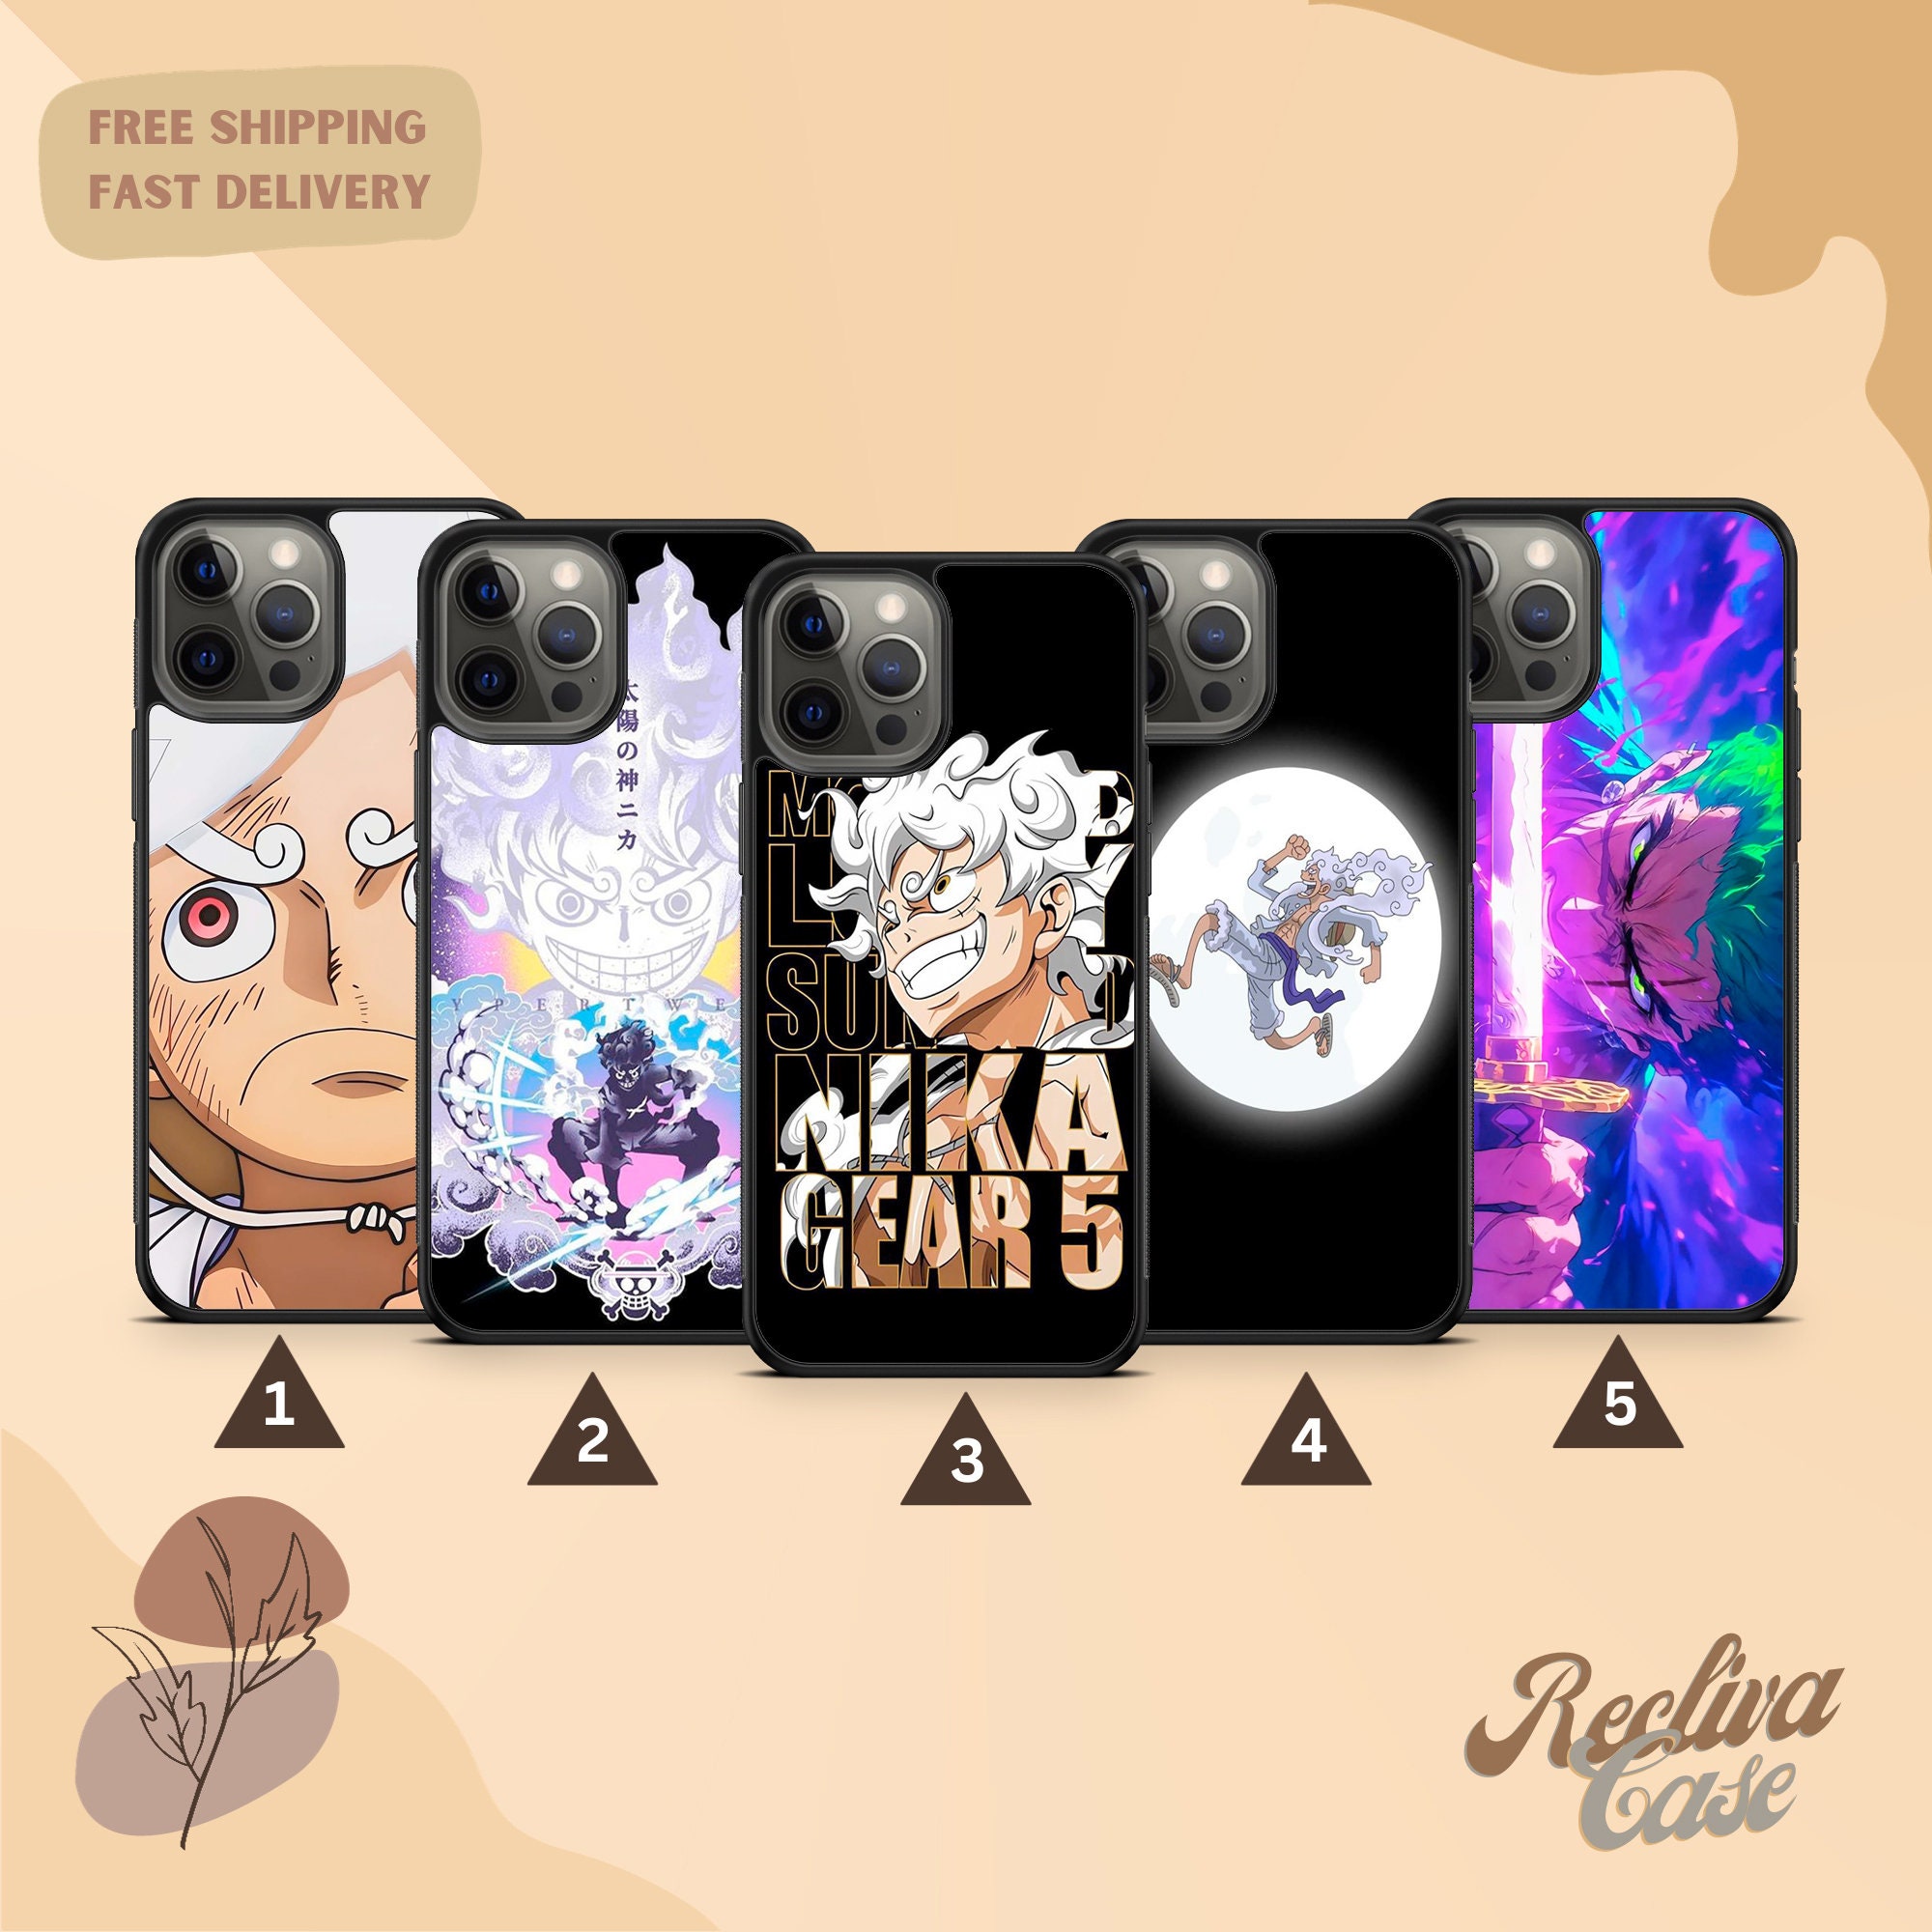 ONE PIECE ANIME STRAW HAT iPhone 13 Case Cover